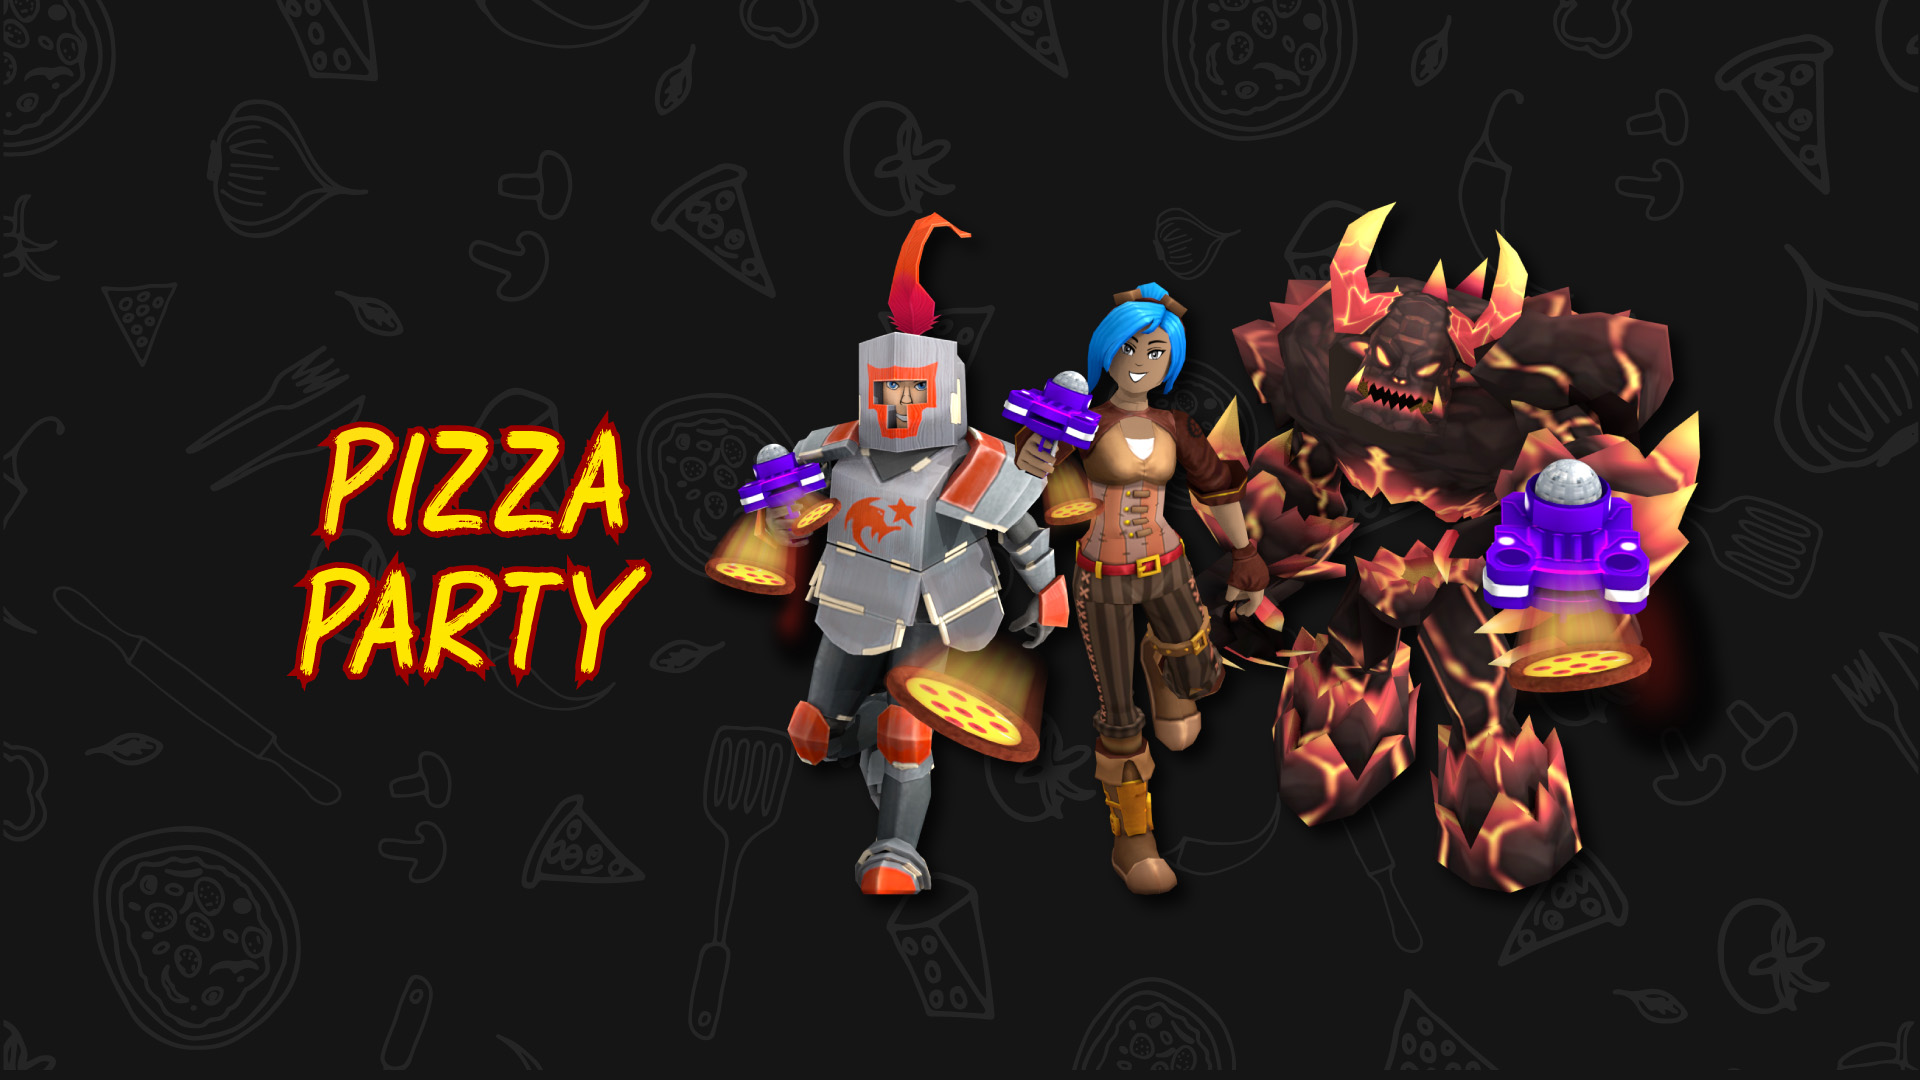 Pizza Party Event Work At A Pizza Place Wiki Fandom - codes for work at a pizza place roblox wiki